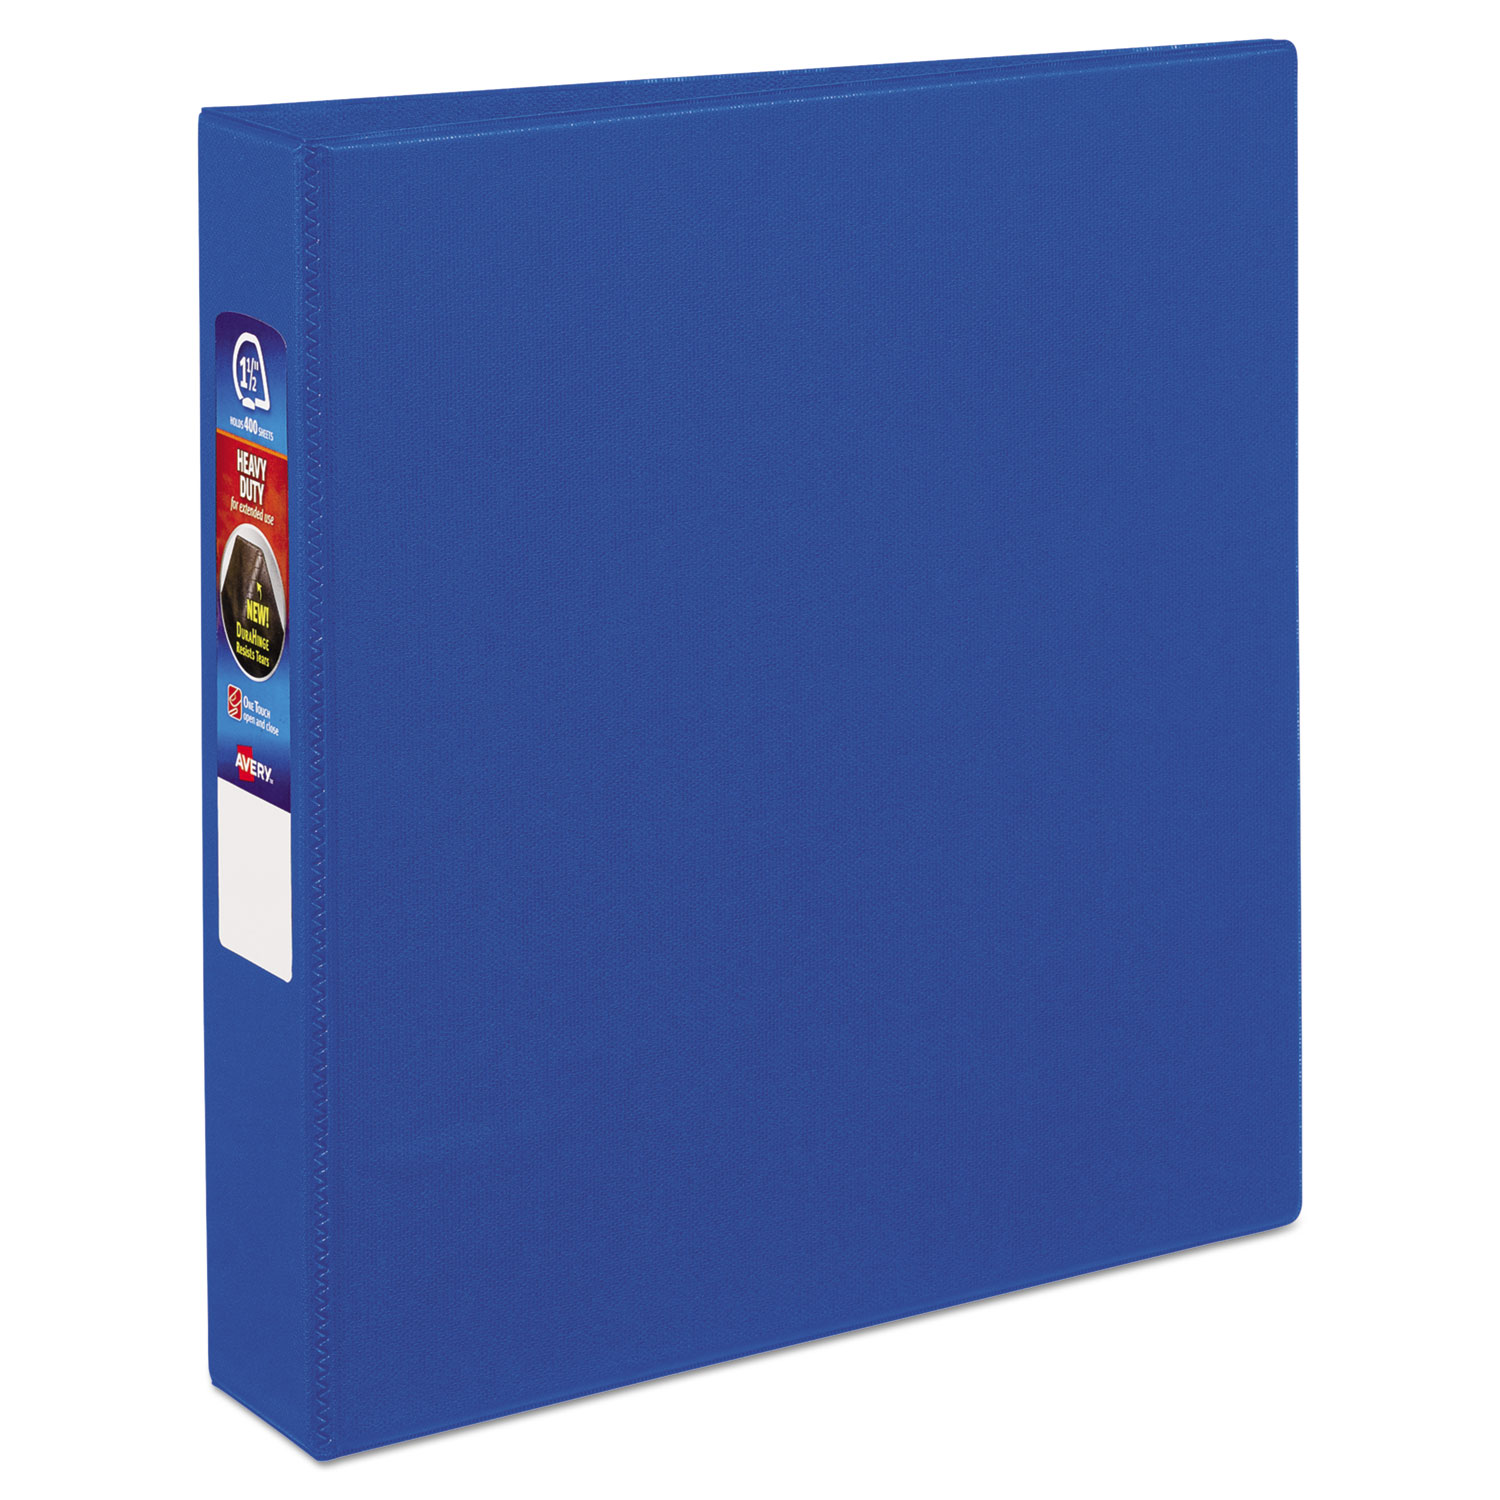  Avery 79885 Heavy-Duty Non-View Binder with DuraHinge and Locking One Touch EZD Rings, 3 Rings, 1.5 Capacity, 11 x 8.5, Blue (AVE79885) 